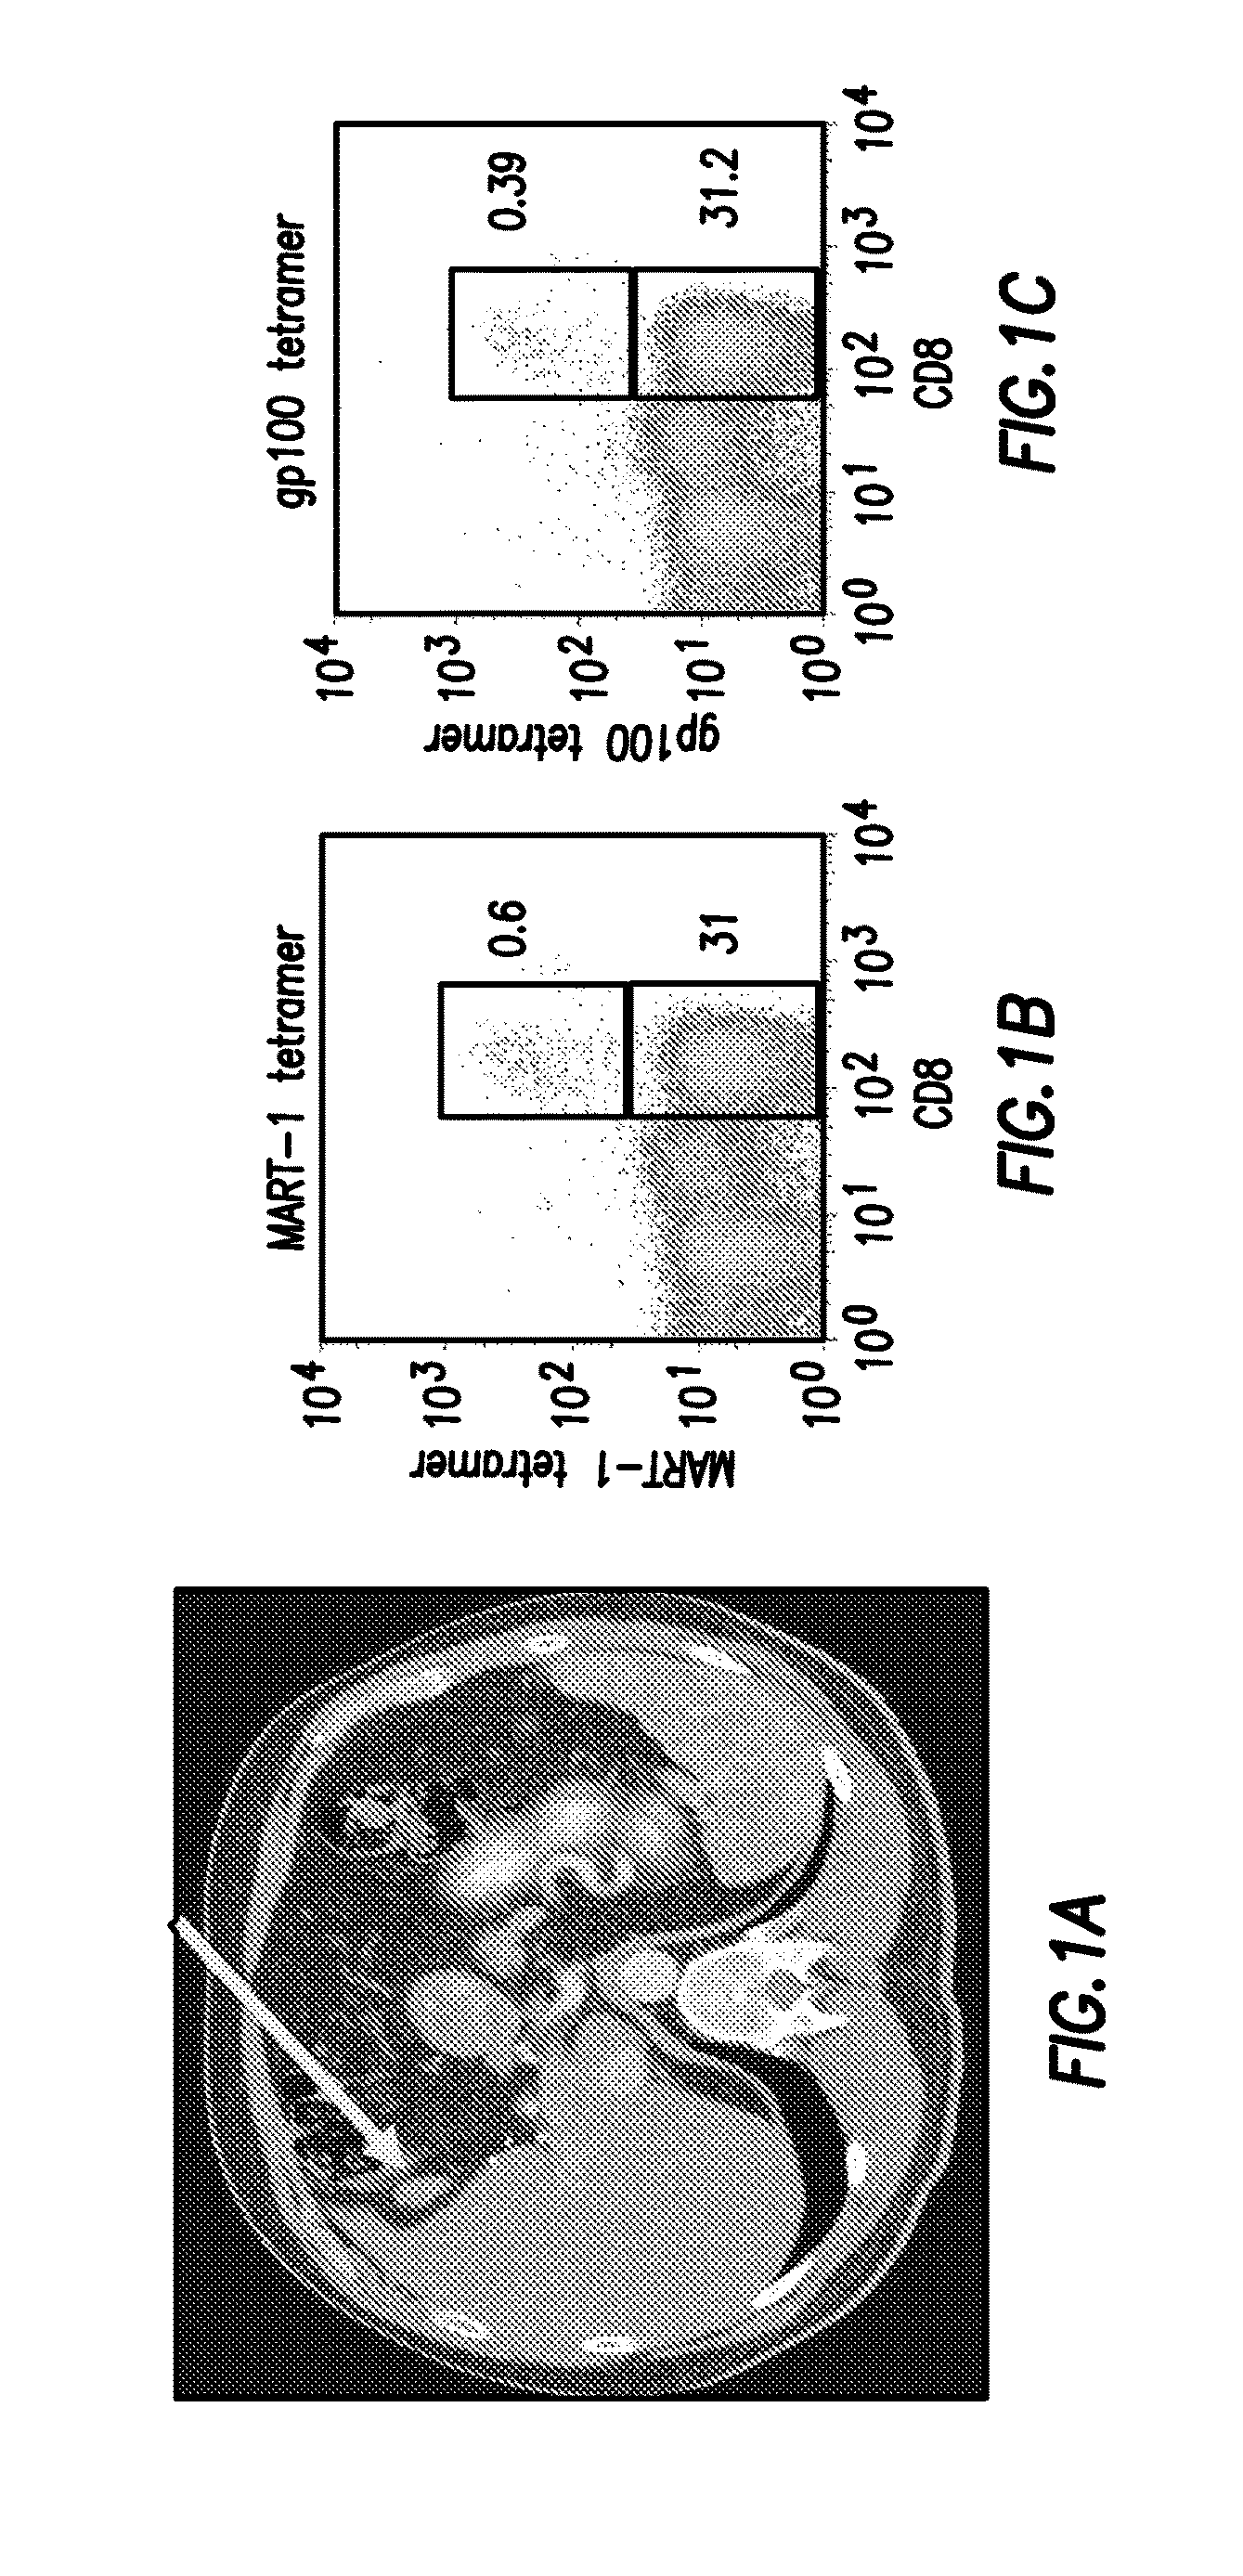 B and T lymphocyte attenuator marker for use in adoptive T-cell therapy